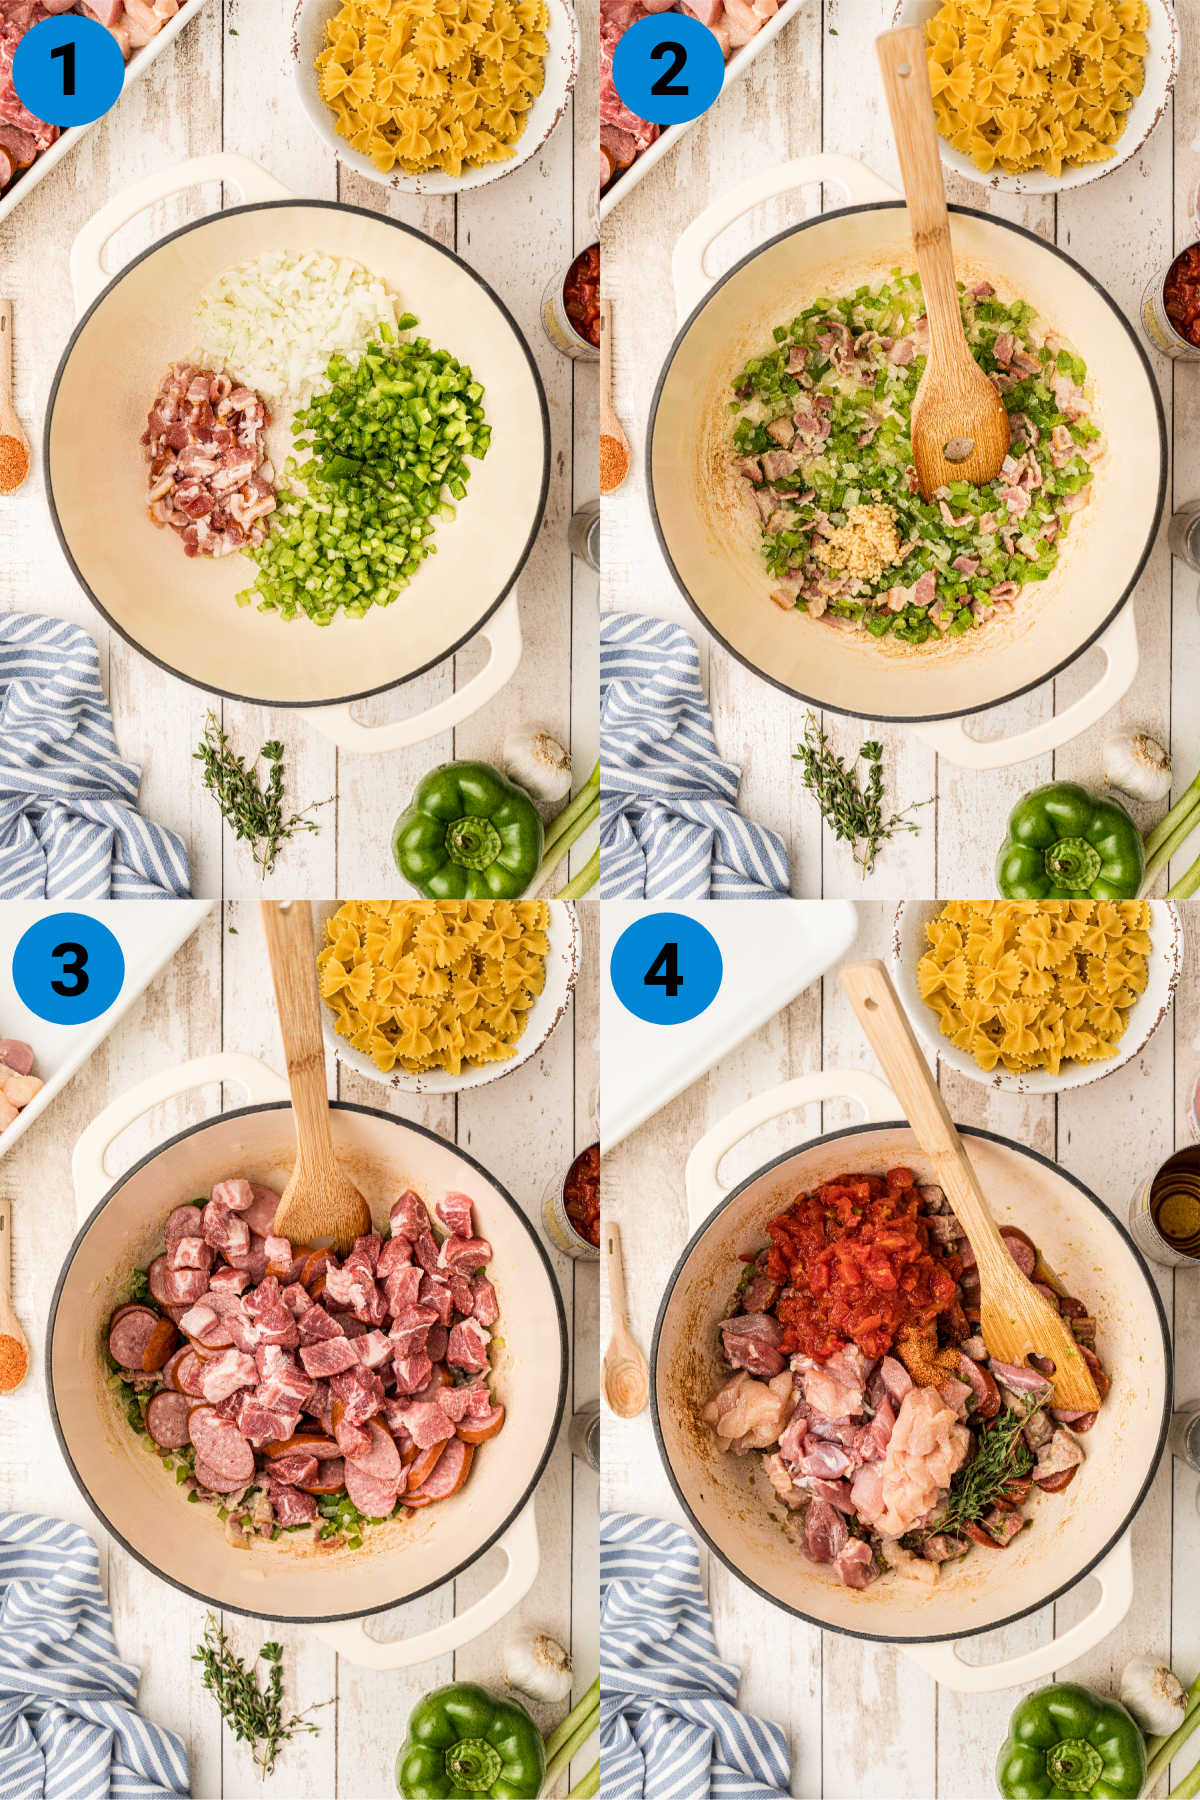 a collage of four images showing how to make a cajun pasta with sausage recipe steps 1 through 4.